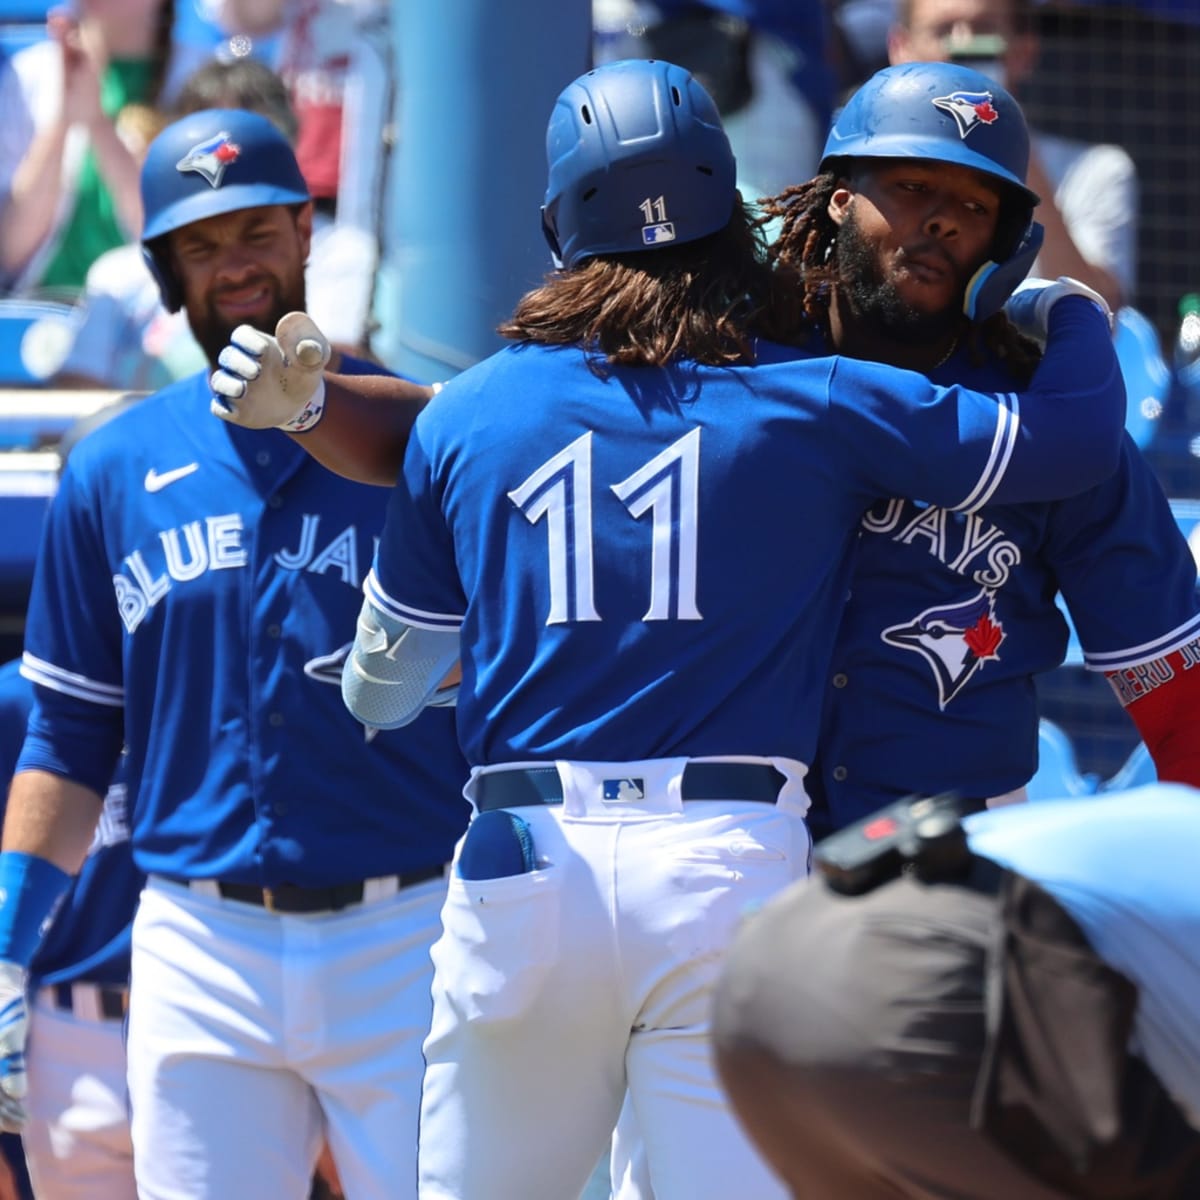 Blue Jays: Are we ready to call the Daulton Varsho Trade a win-win?